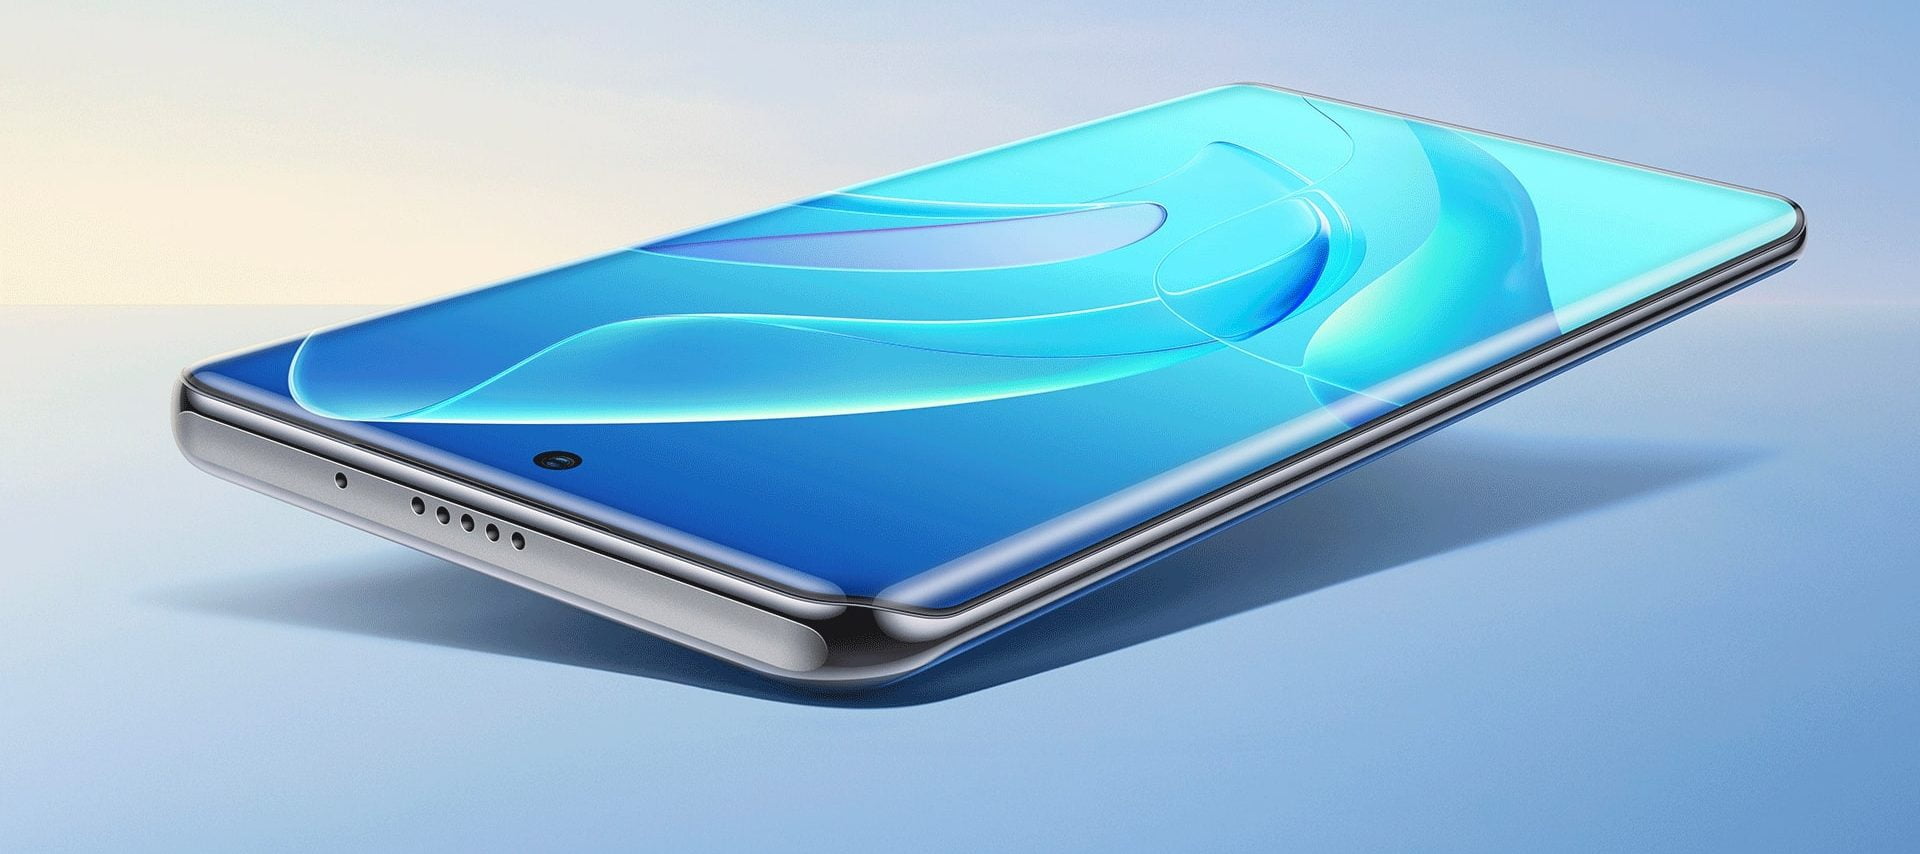 Honor 60 Pro has a display curved on all four sides